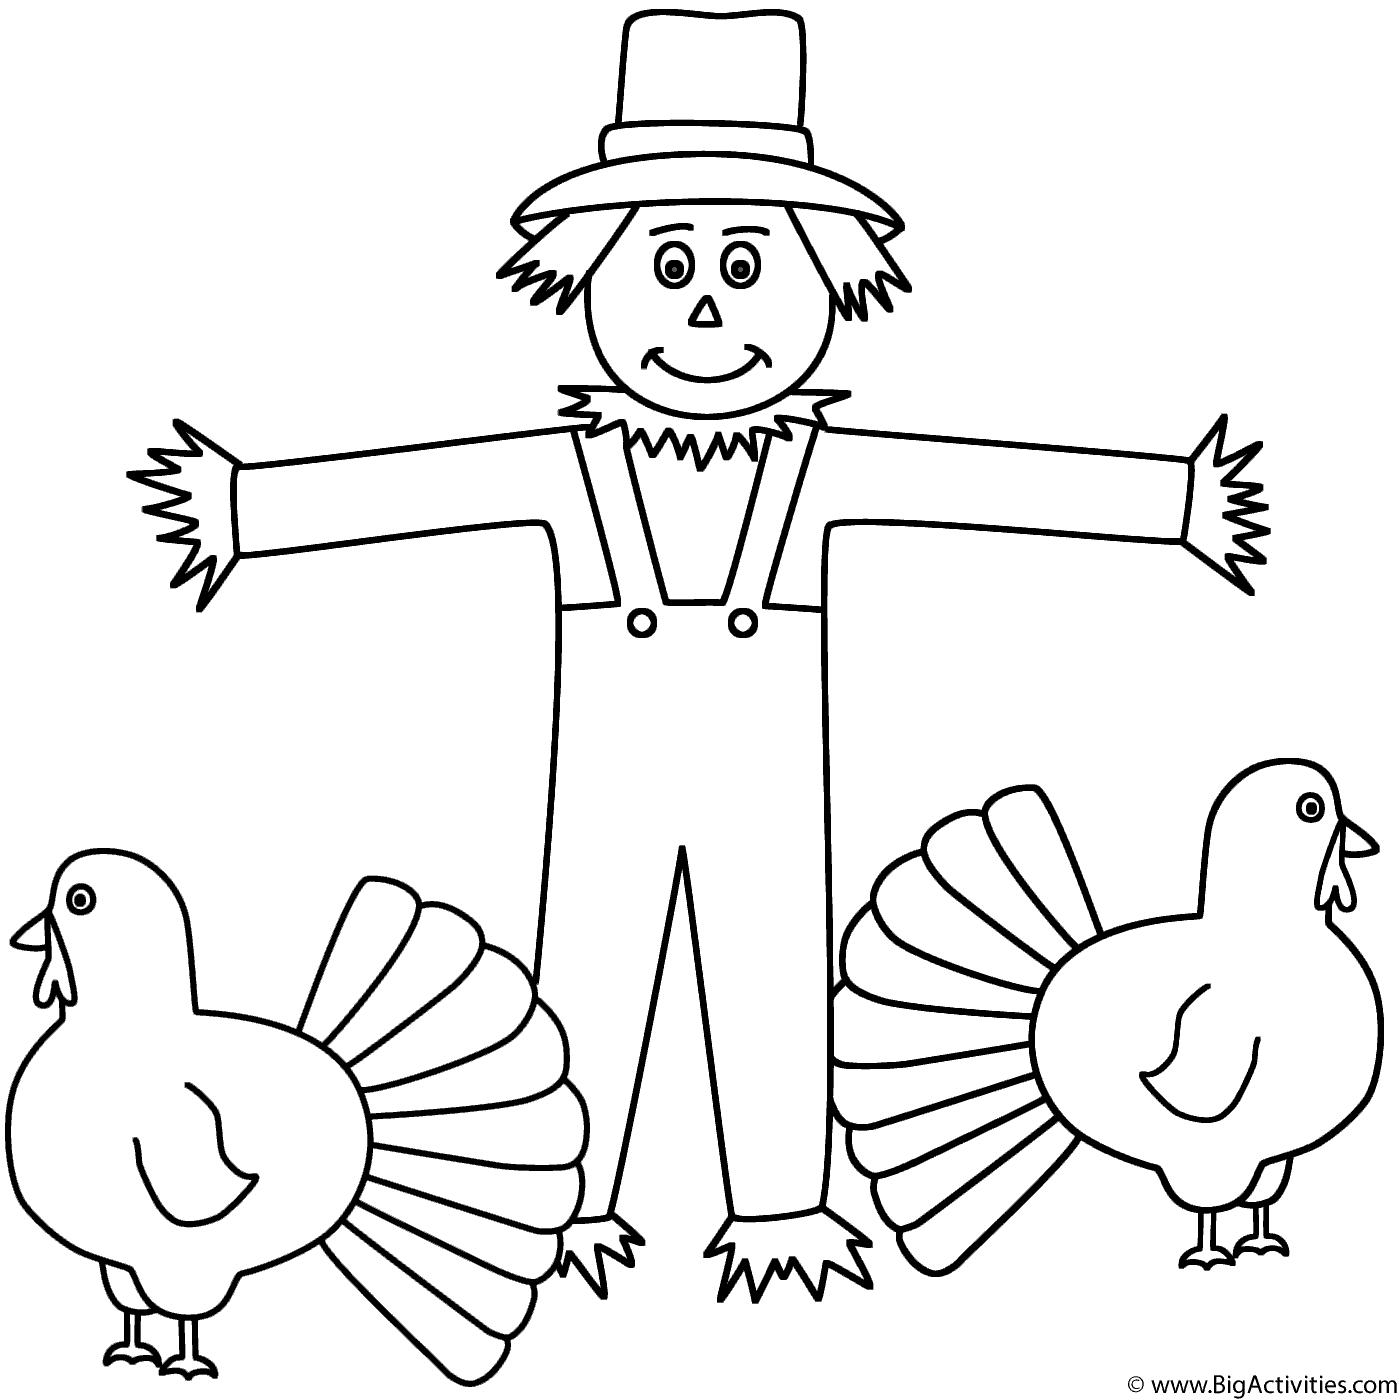 Download Turkeys with scarecrow - Coloring Page (Thanksgiving)